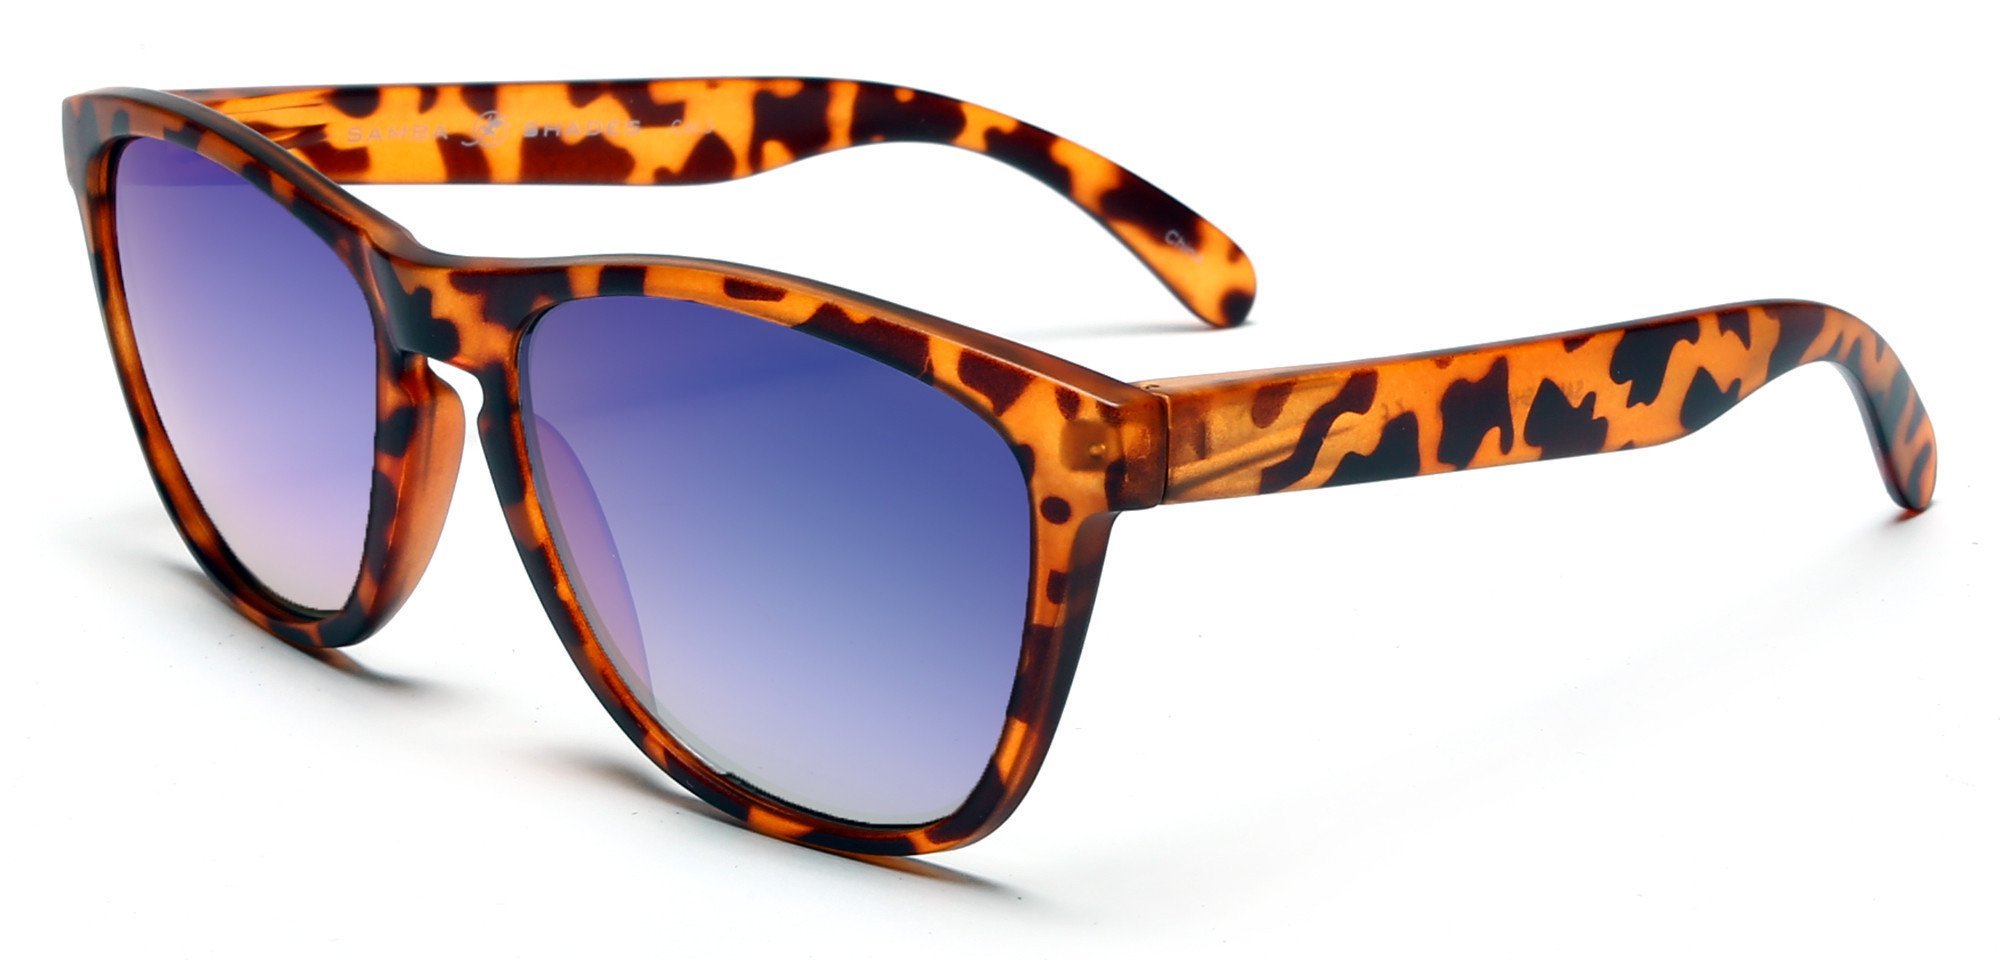 Don and Audrey Form Horn Rimmed Sunglasses Orange Brown-Samba Shades